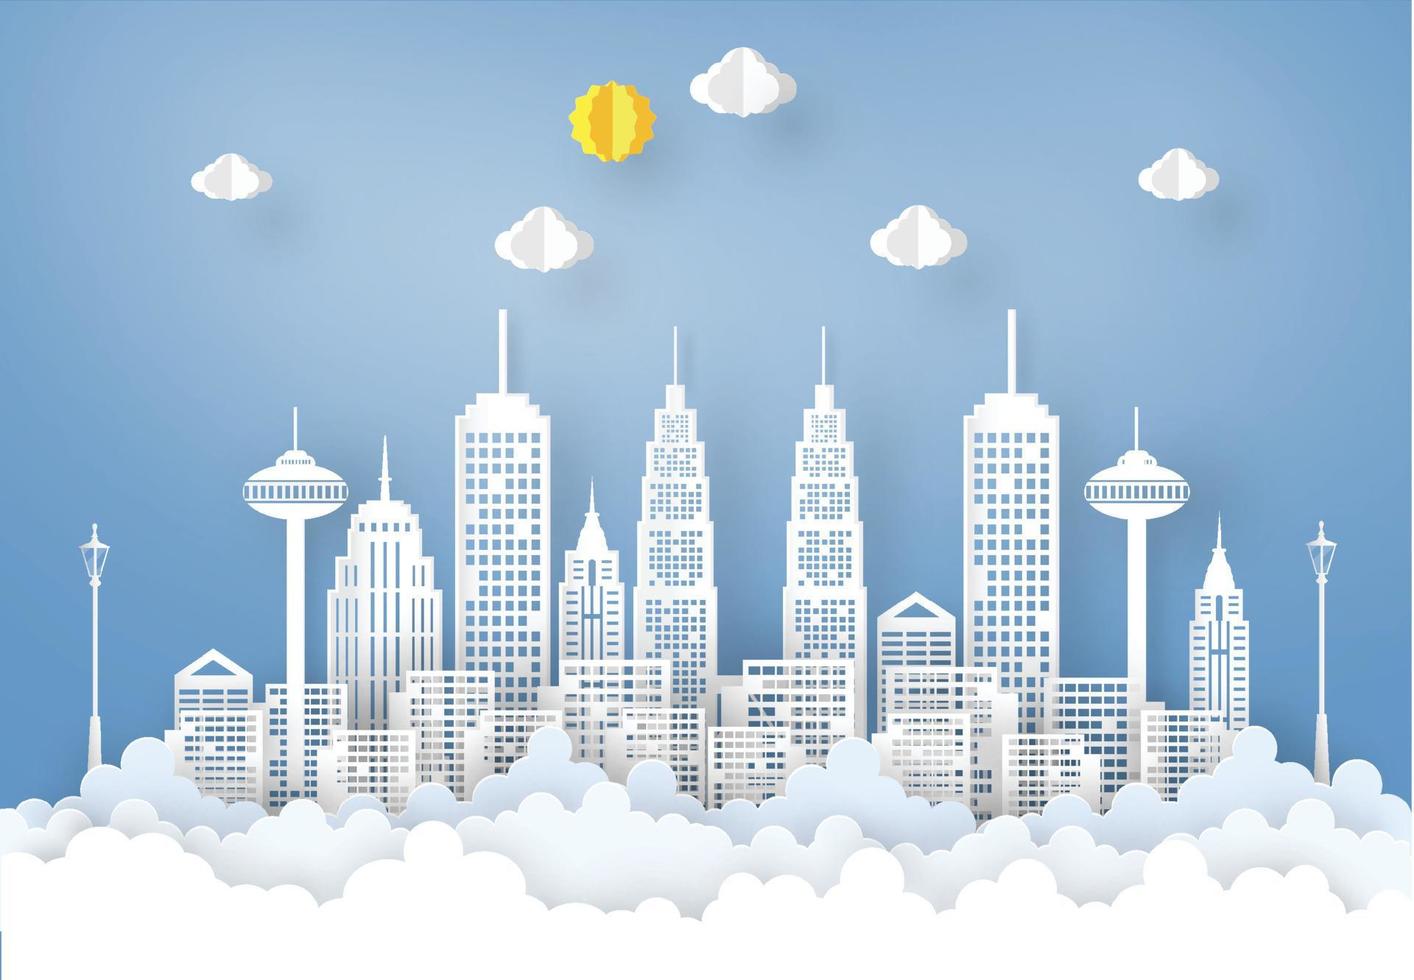 Paper art design style City in the Cloud the concept is Happy City ,City go Green or clean energy city , vector design element illustration